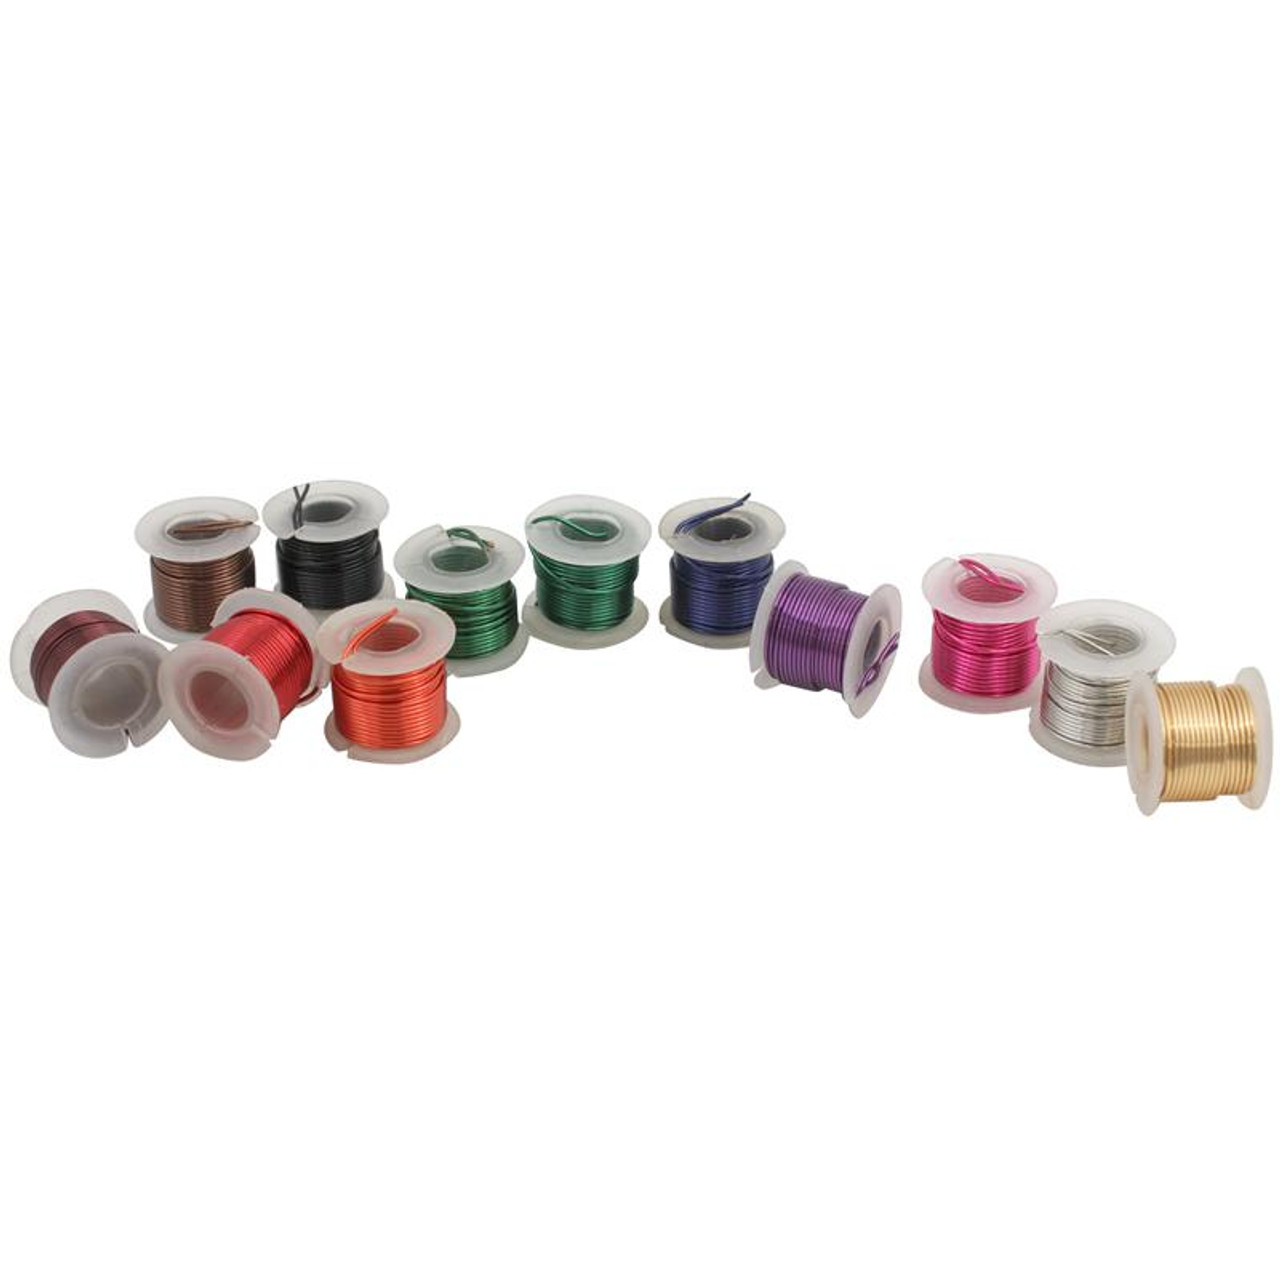 9 Pack: 20 Gauge Colored Copper Wire by Bead Landing™